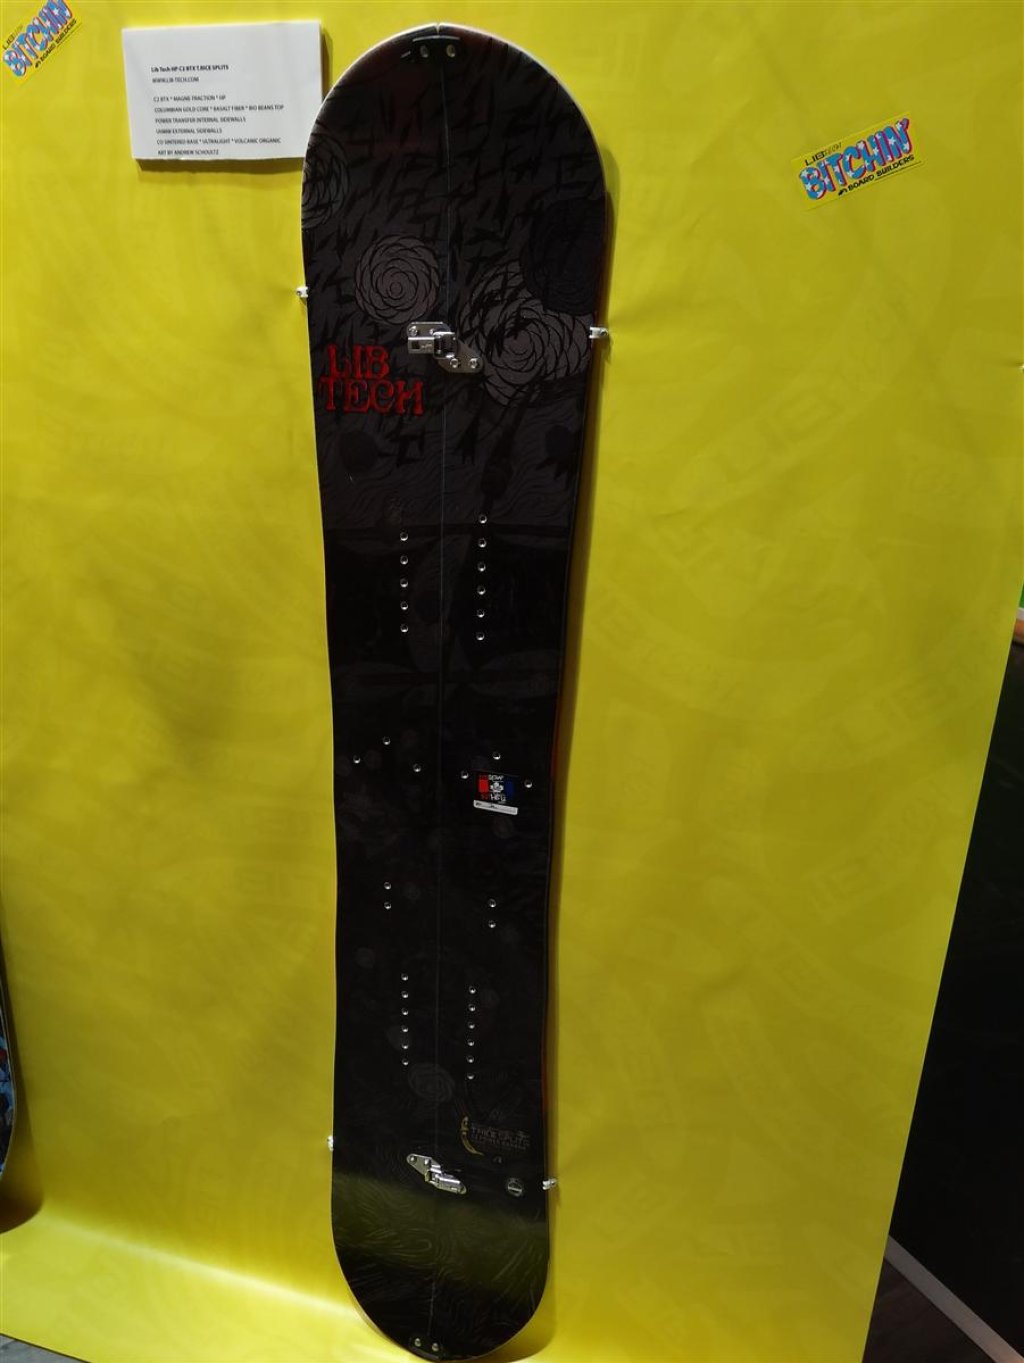 There is also a splitboard from LIB-Tech